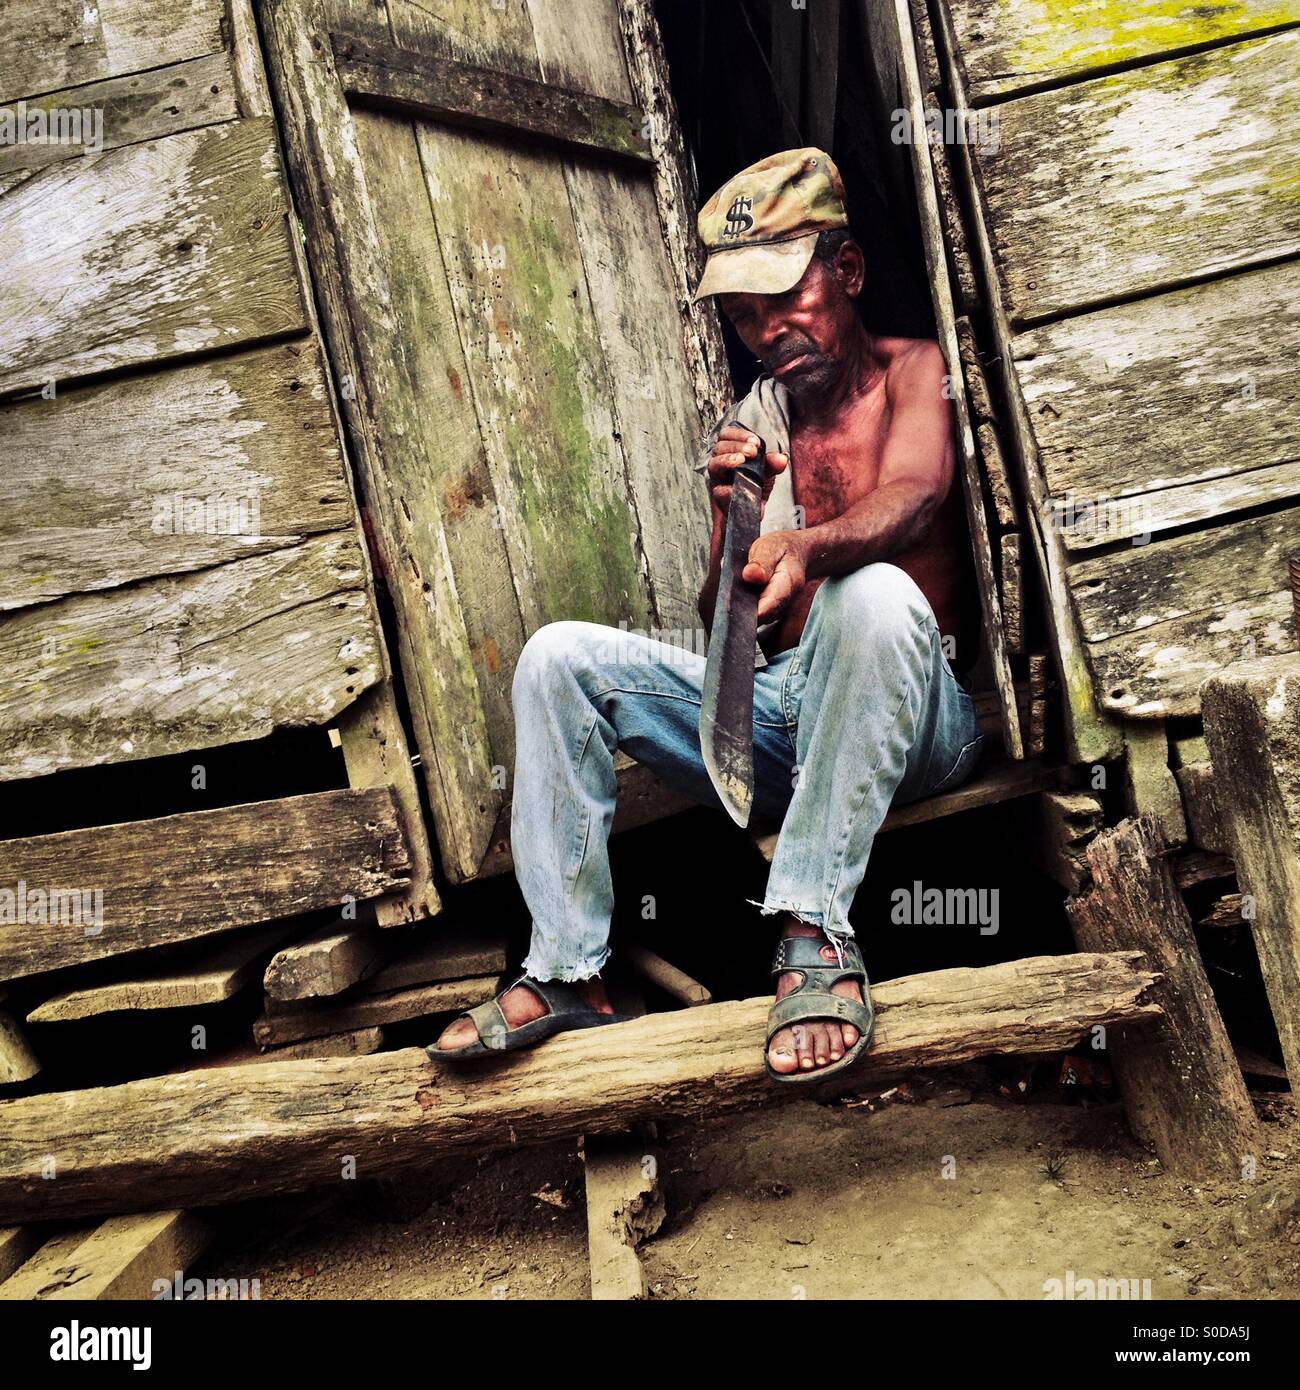 A Panamanian peasant checks the sharpness of the machete blade while sitting in the door of his house in Boca de Cupe, a community in the jungle region of Darién, Panama, 27 January 2015. Stock Photo